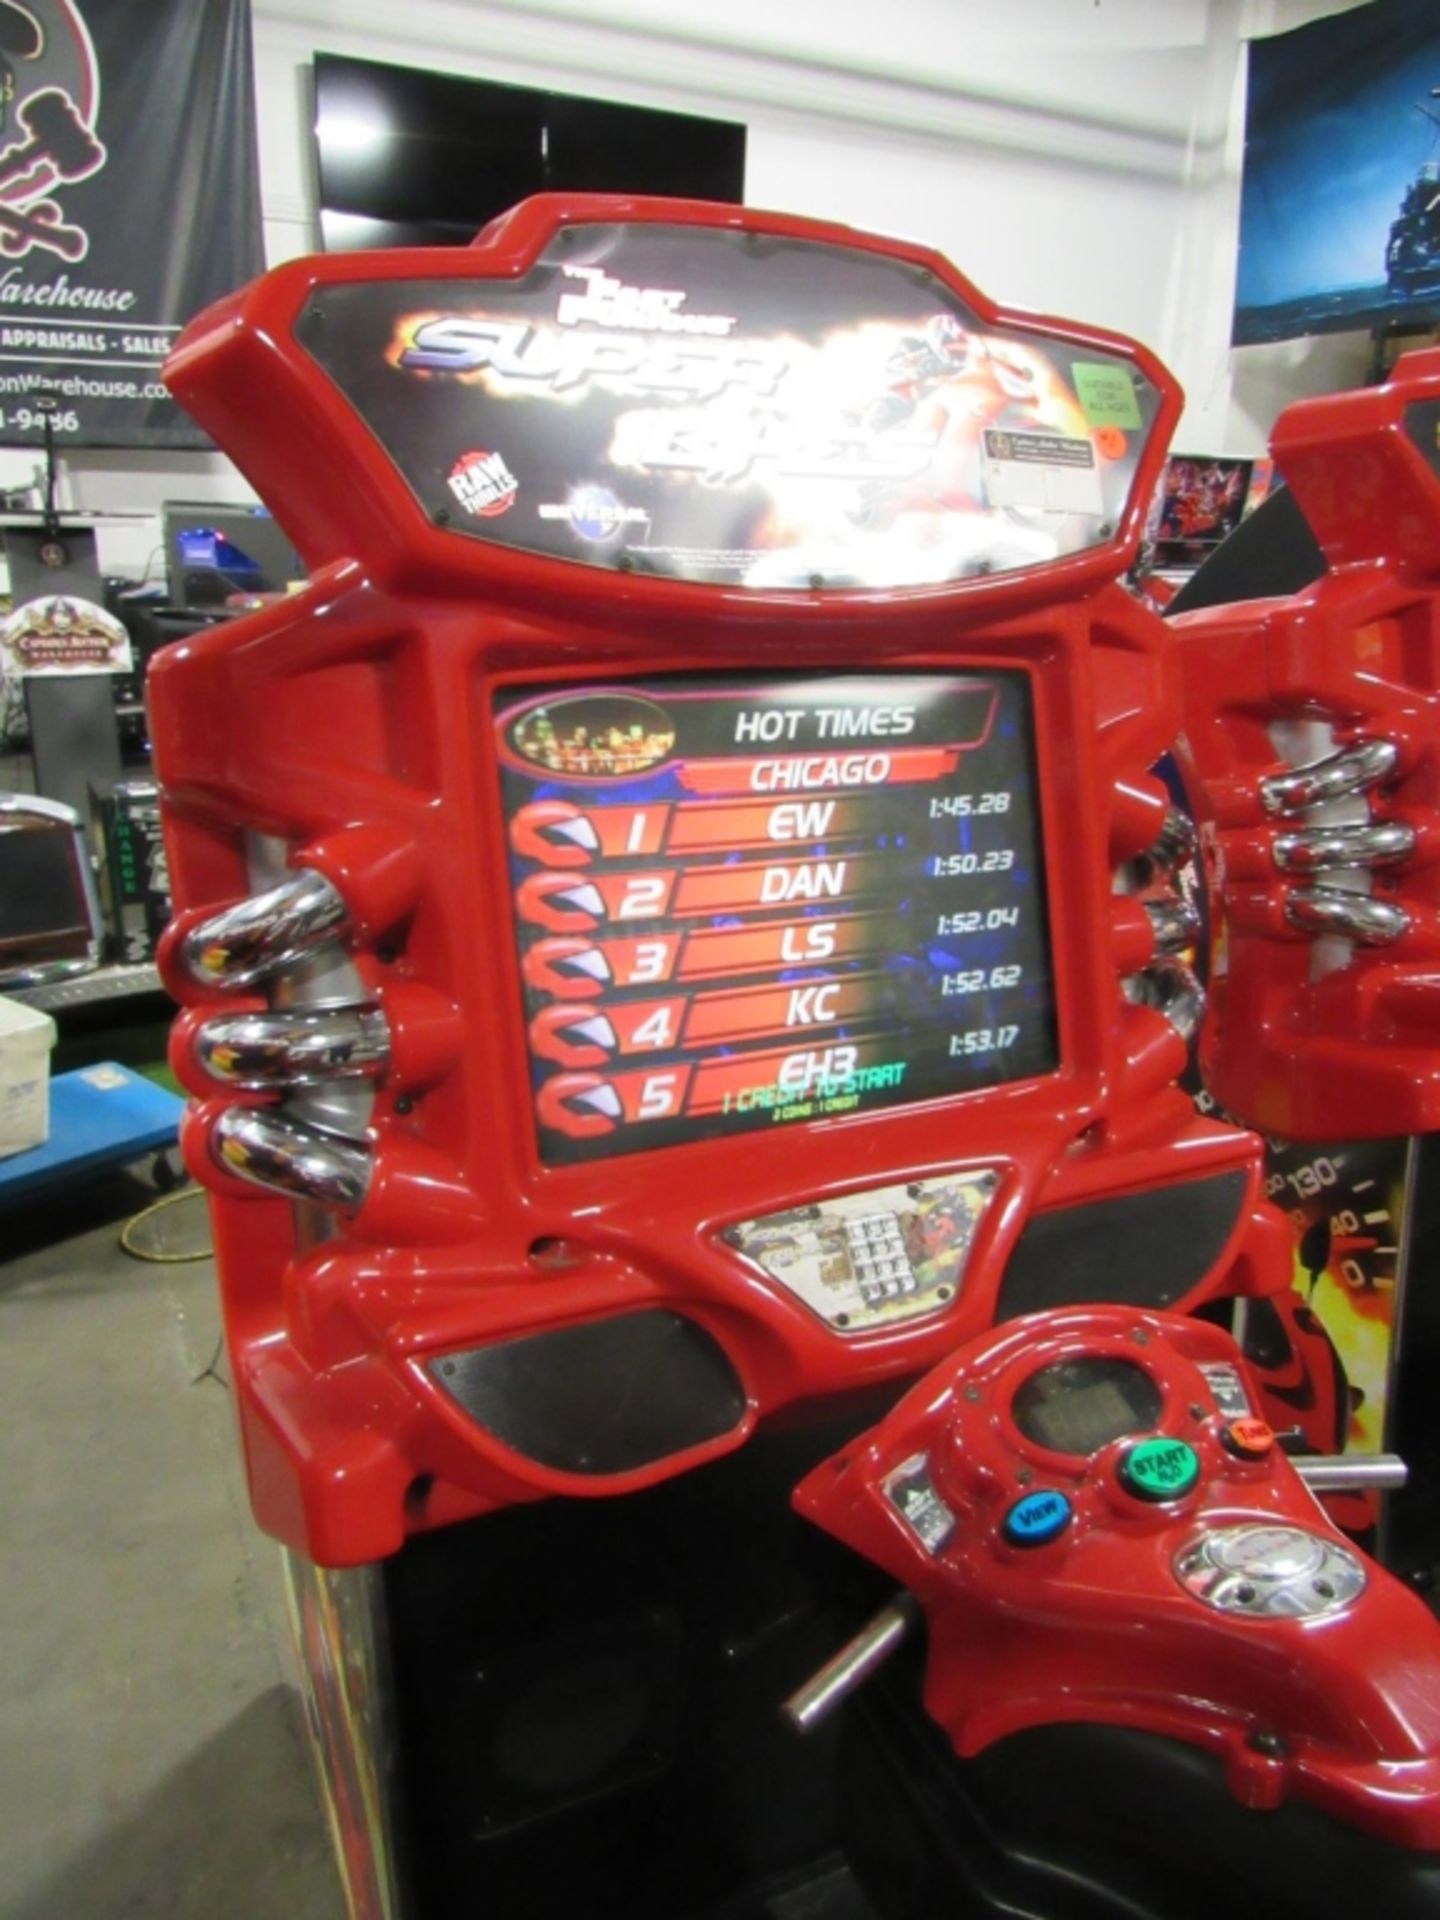 SUPER BIKES FAST & FURIOUS RED RACING ARCADE #2 - Image 7 of 7